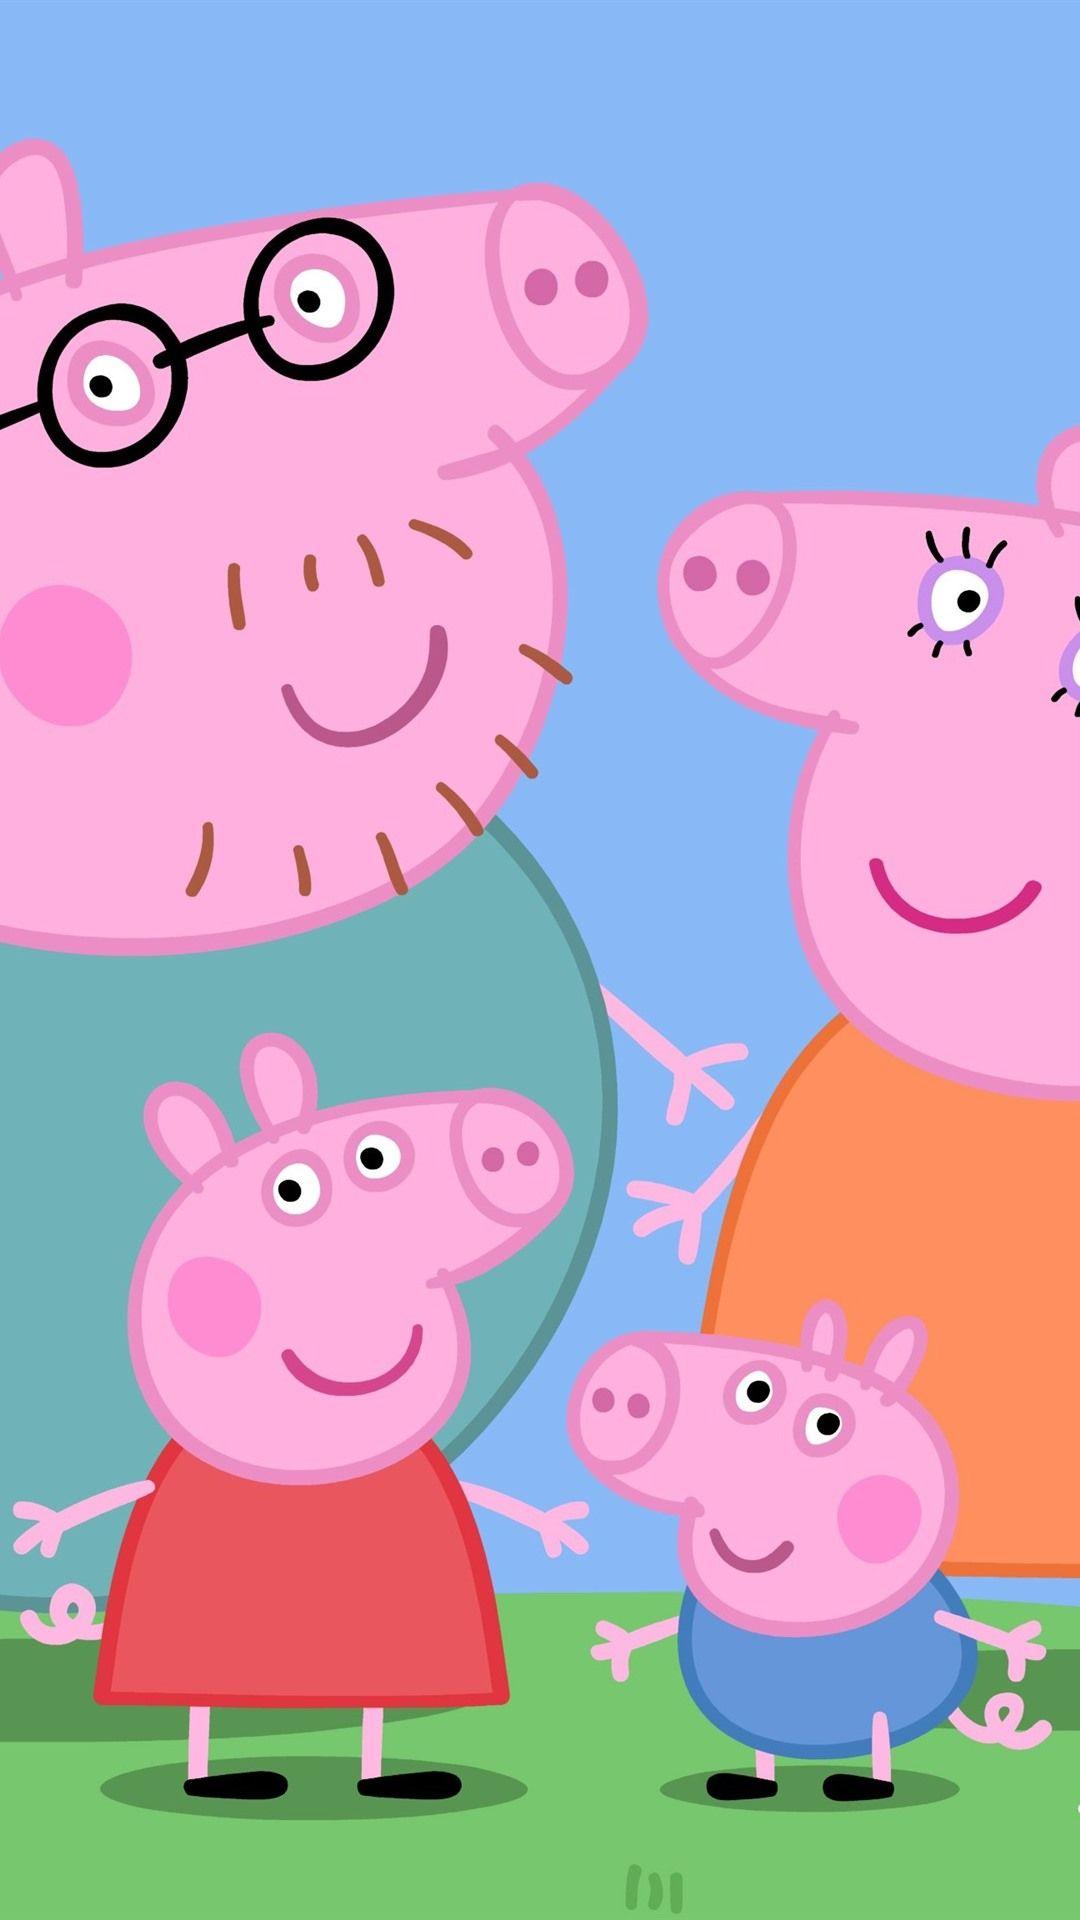 Peppa Pig Supreme KoLPaPer Awesome Free HD iPhone Wallpapers Free Download